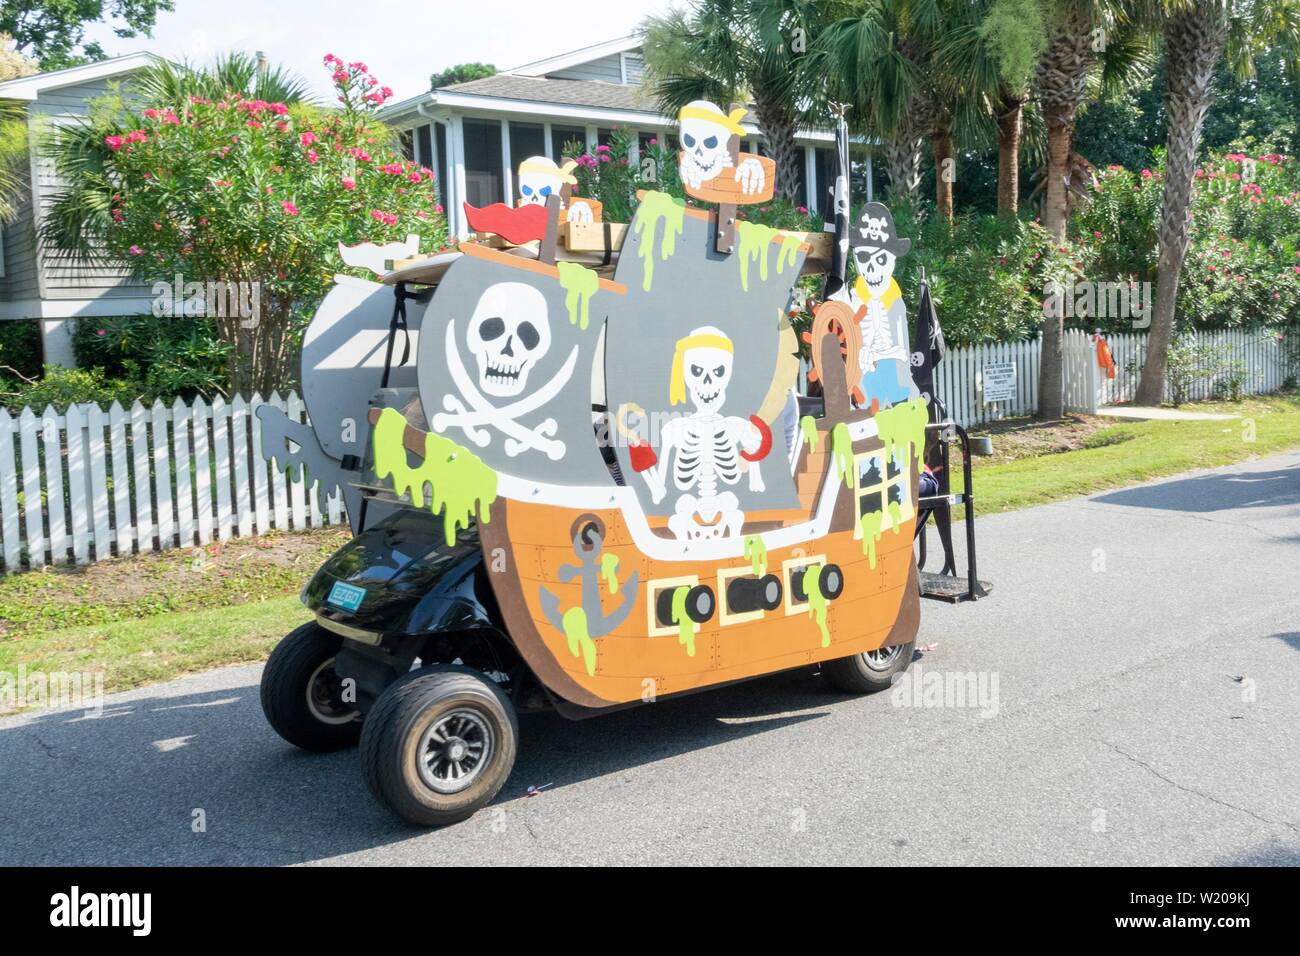 Sullivans Island South Carolina, USA. 4th July, 2019. A golf cart float decorated as a pirate ship rides down the road during the annual Independence Day parade July 4, 2019 in Sullivan's Island, South Carolina. The tiny affluent Sea Island beach community across from Charleston holds an outsized golf cart parade featuring more than 75 decorated carts. Credit: Planetpix/Alamy Live News Stock Photo